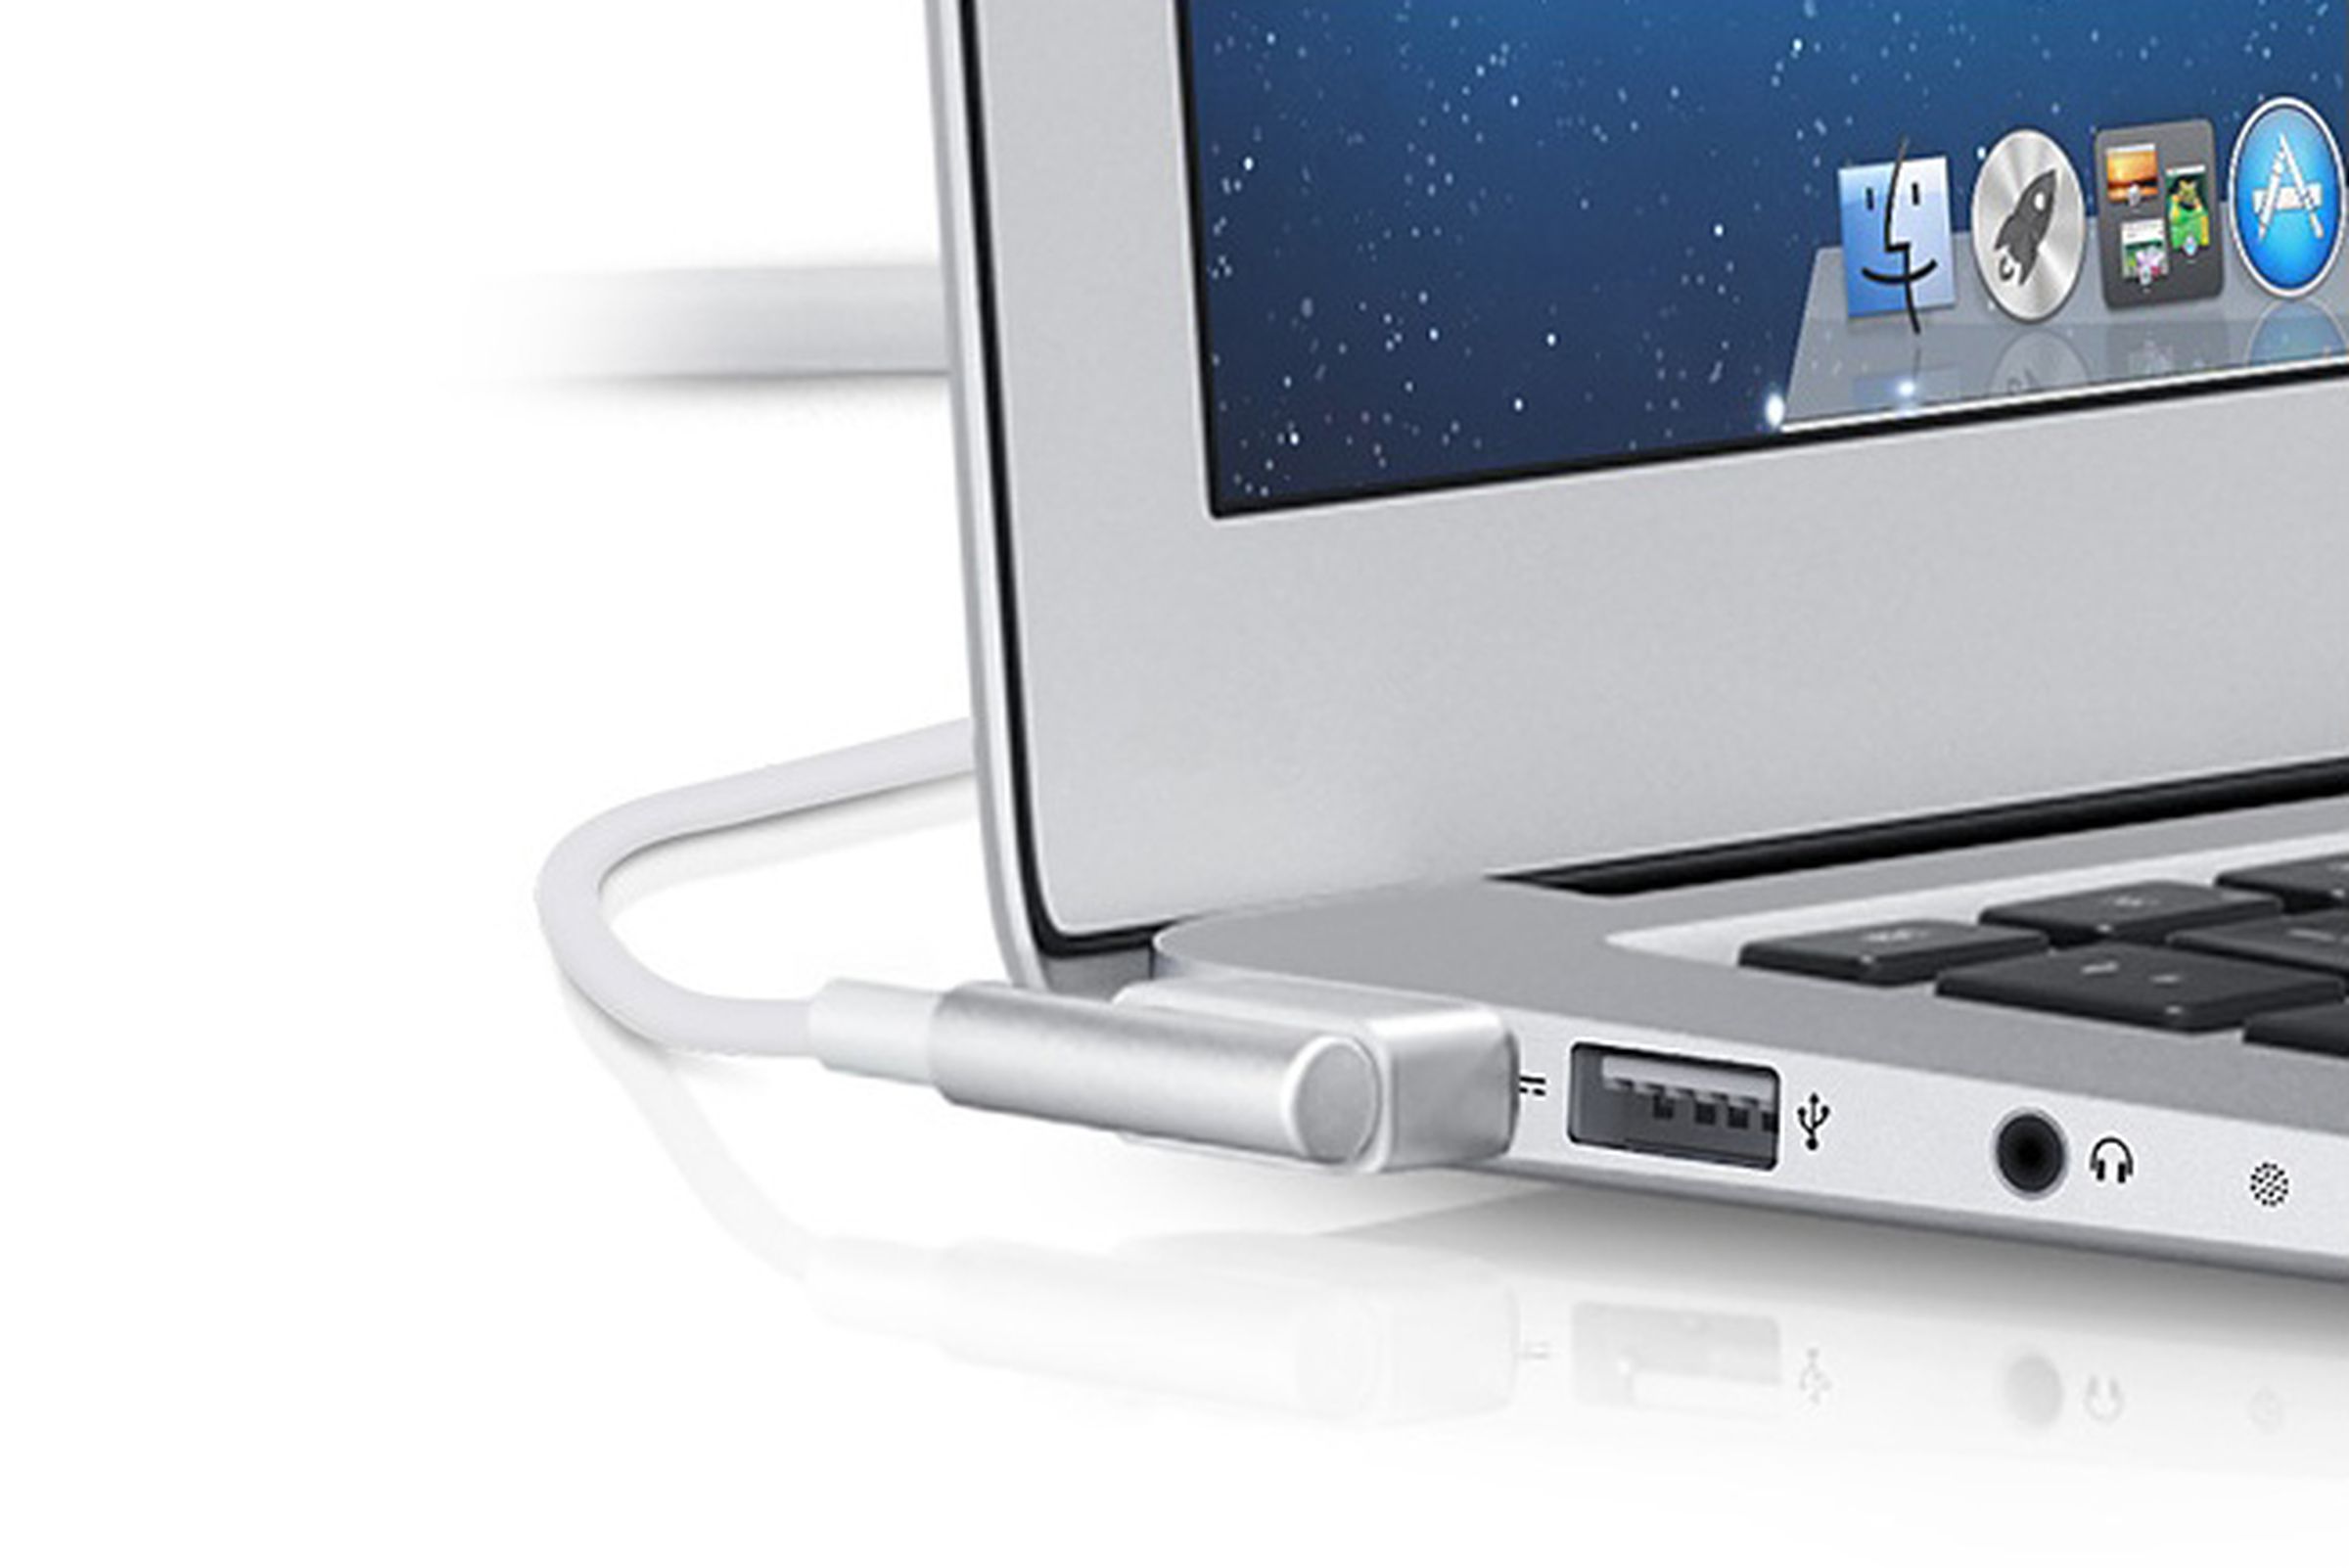 MagSafe 2 power connector press pictures